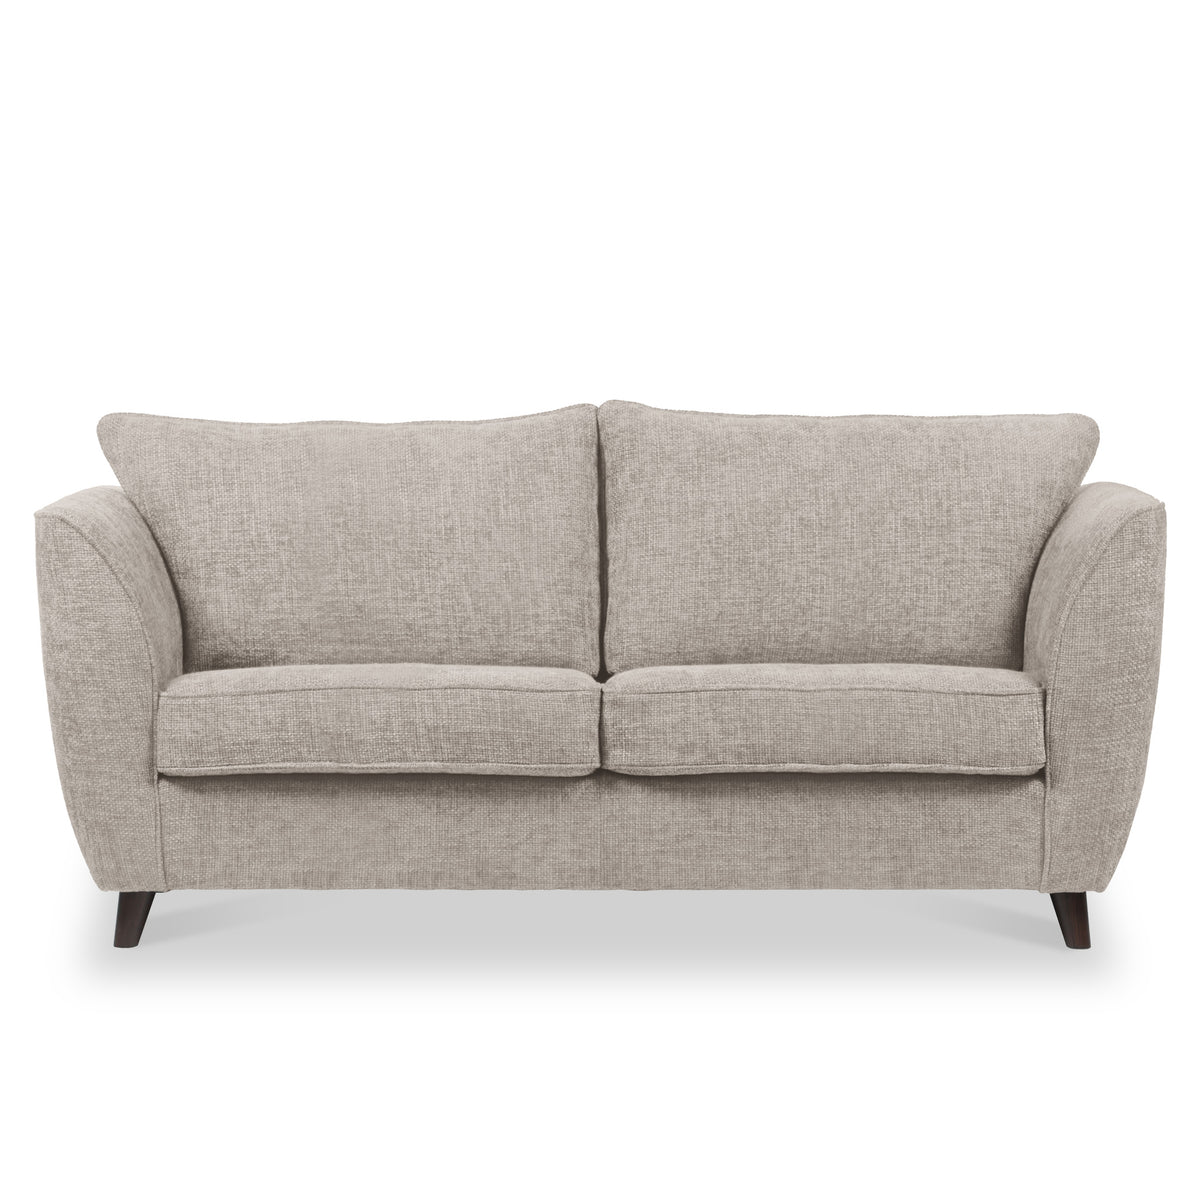 Tamsin Stone 3 Seater couch